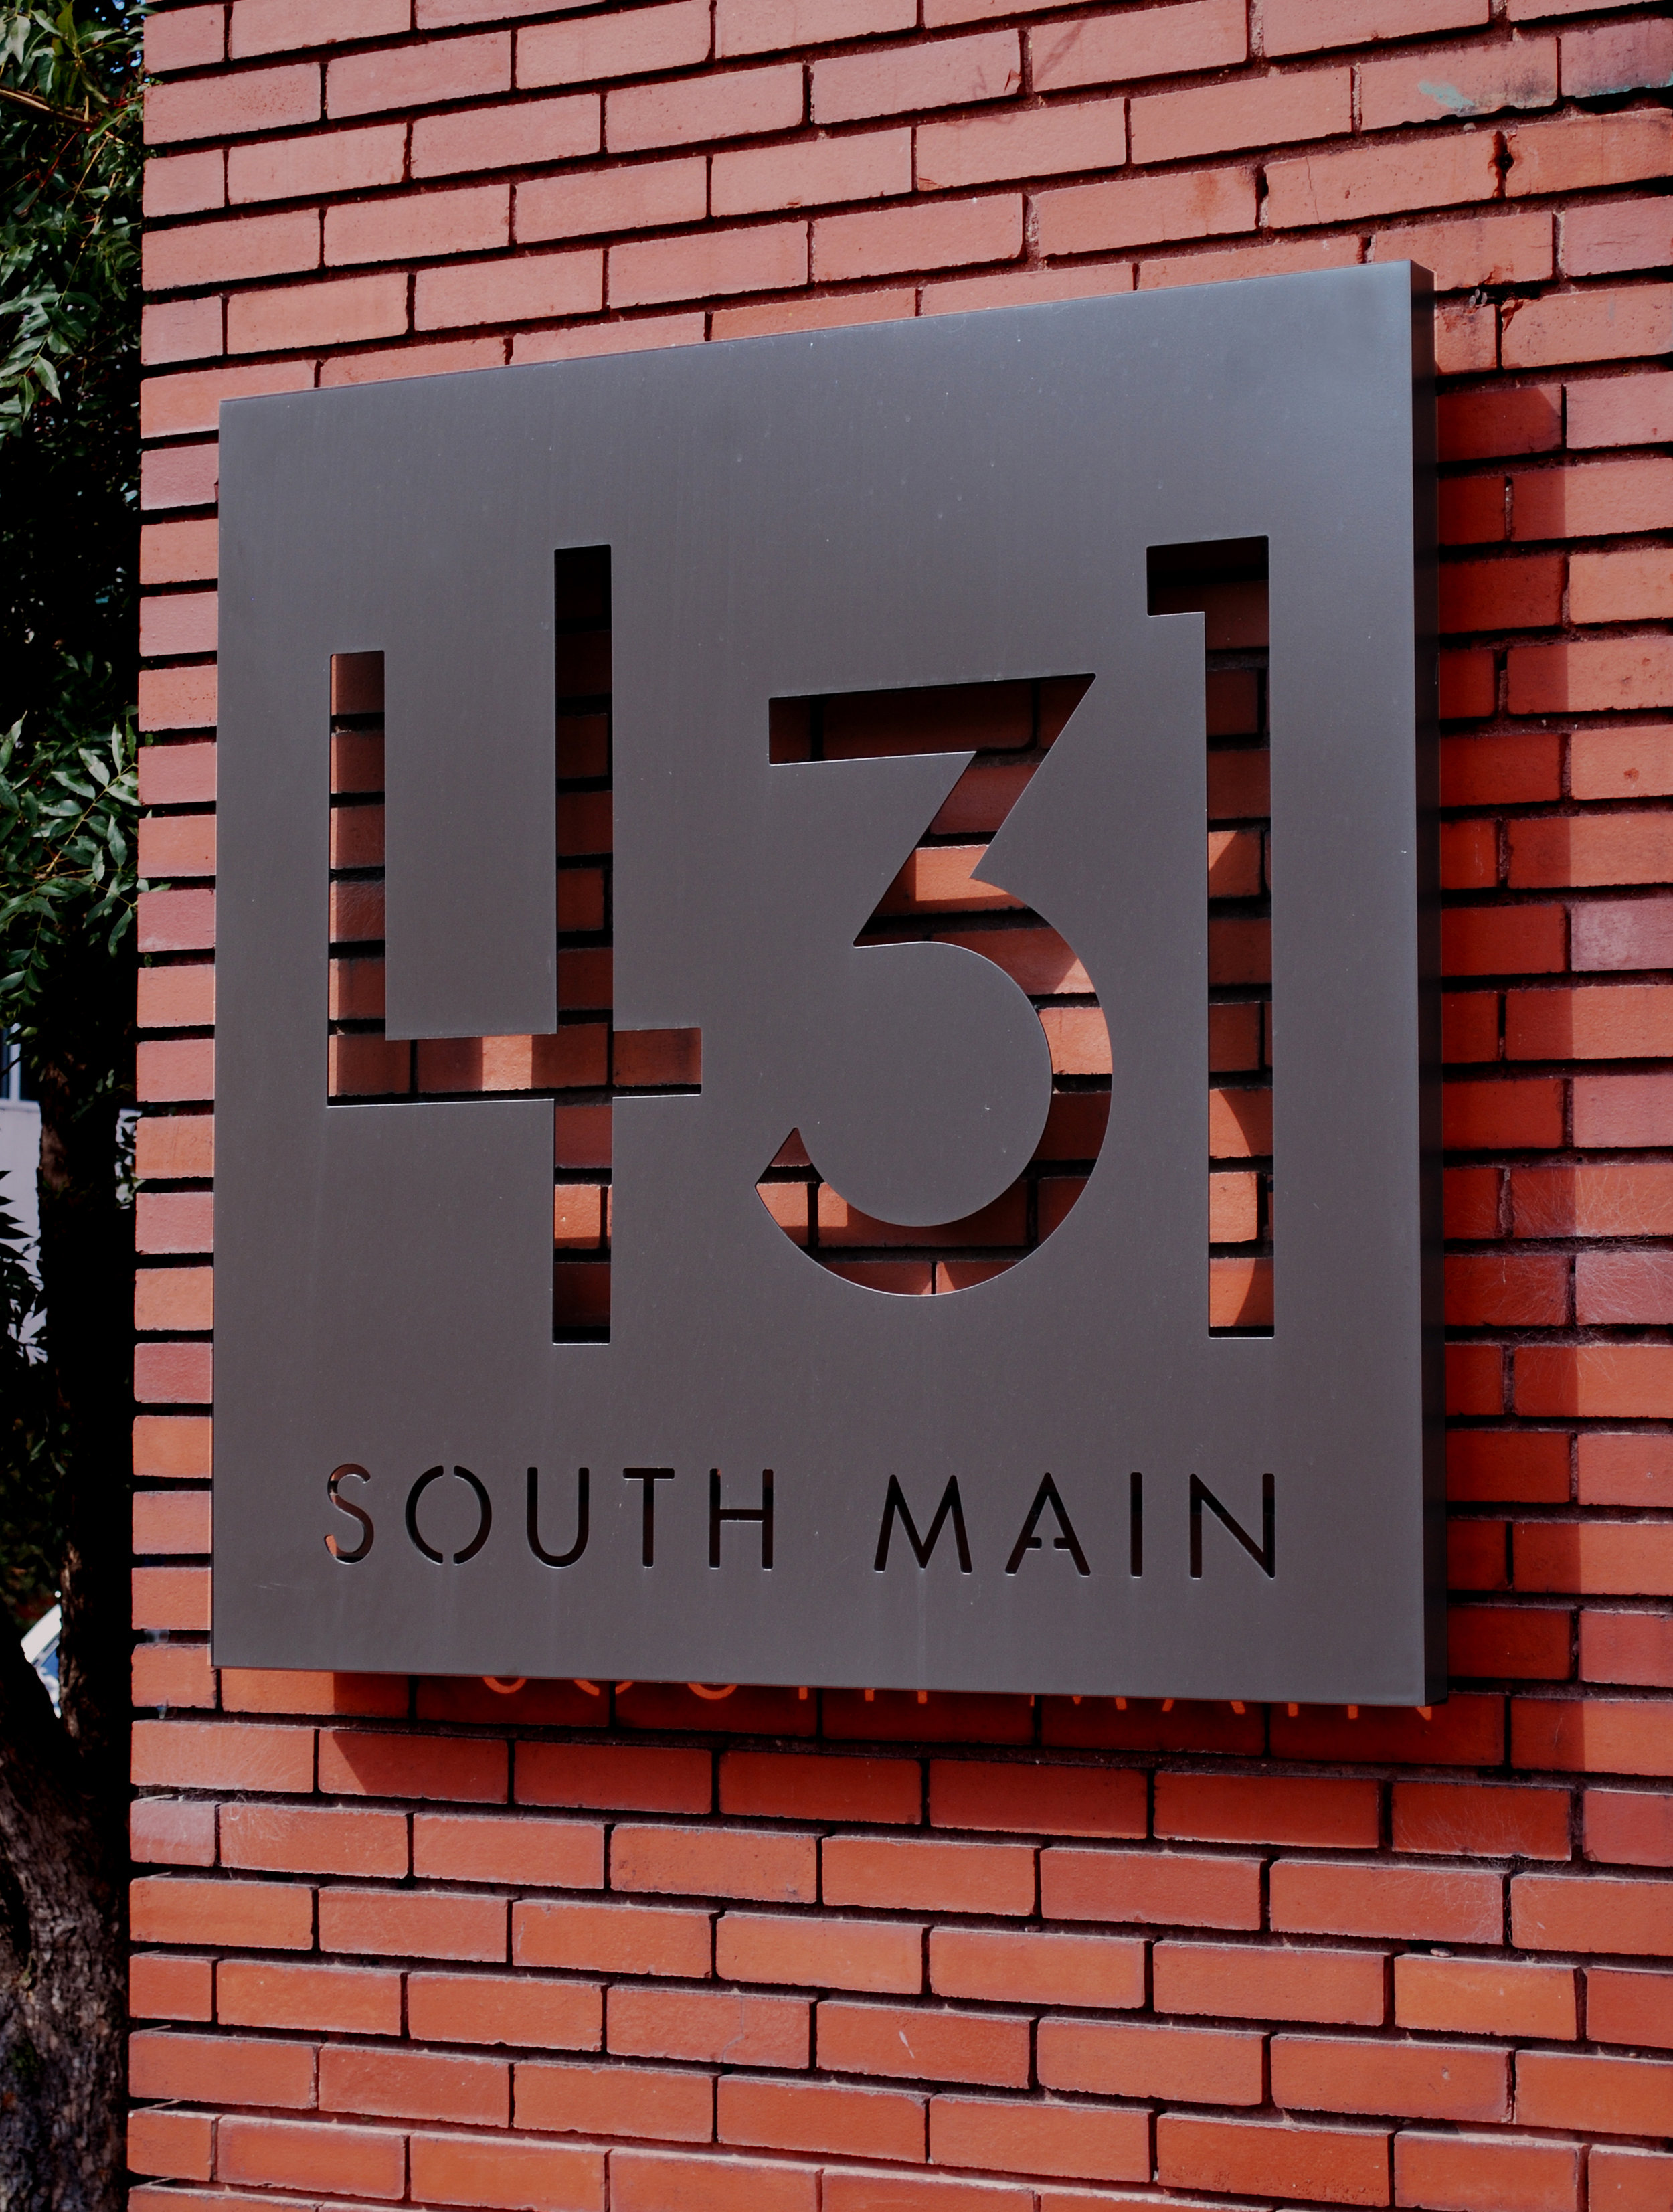  431 South Main building logo and signage  Branding creative and design by Chuck Mitchell  Sign fabrication and installation by Frank Balton Sign Company, Memphis, TN 